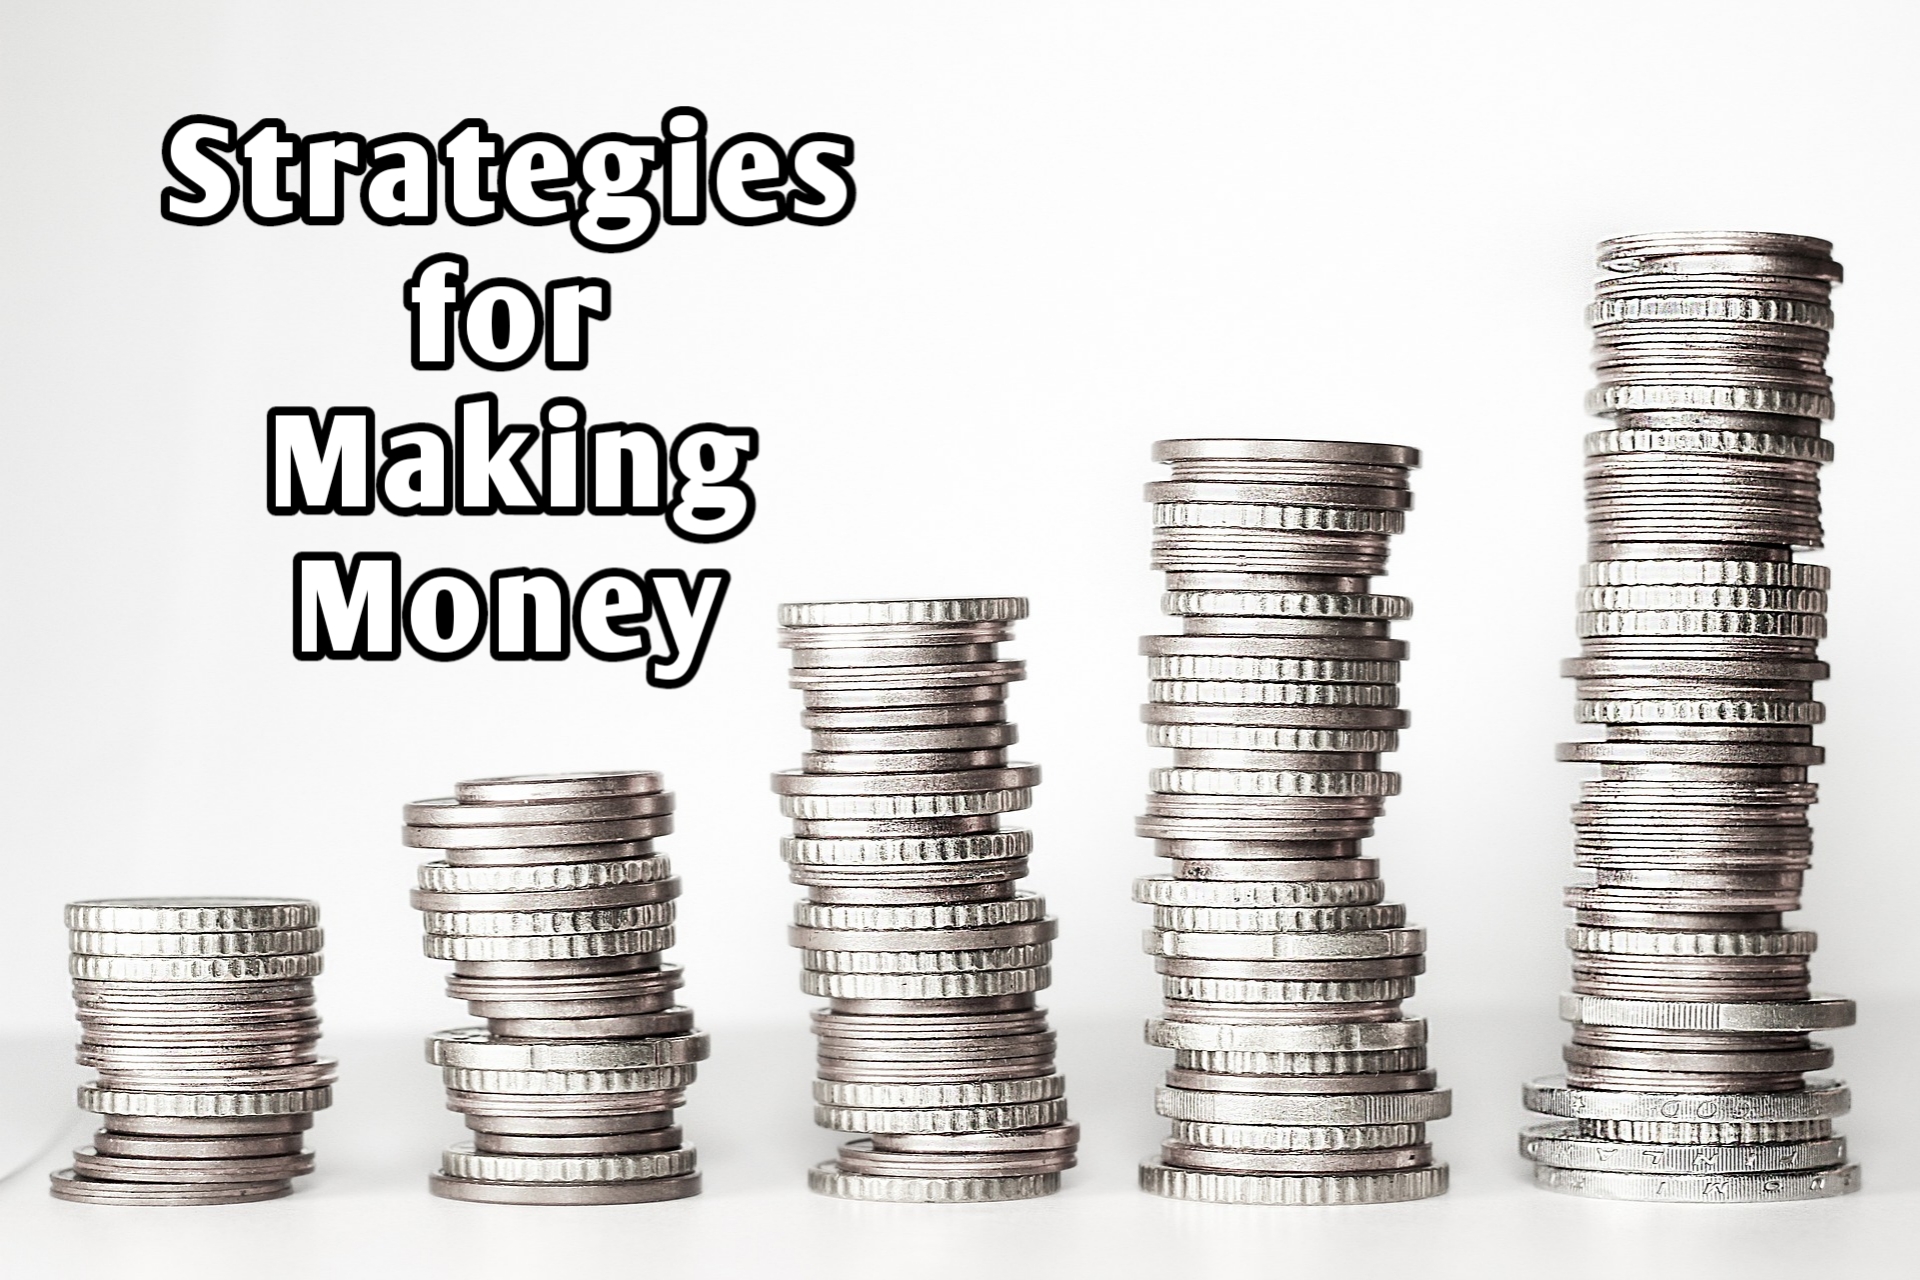 Strategies for Making Money from Money